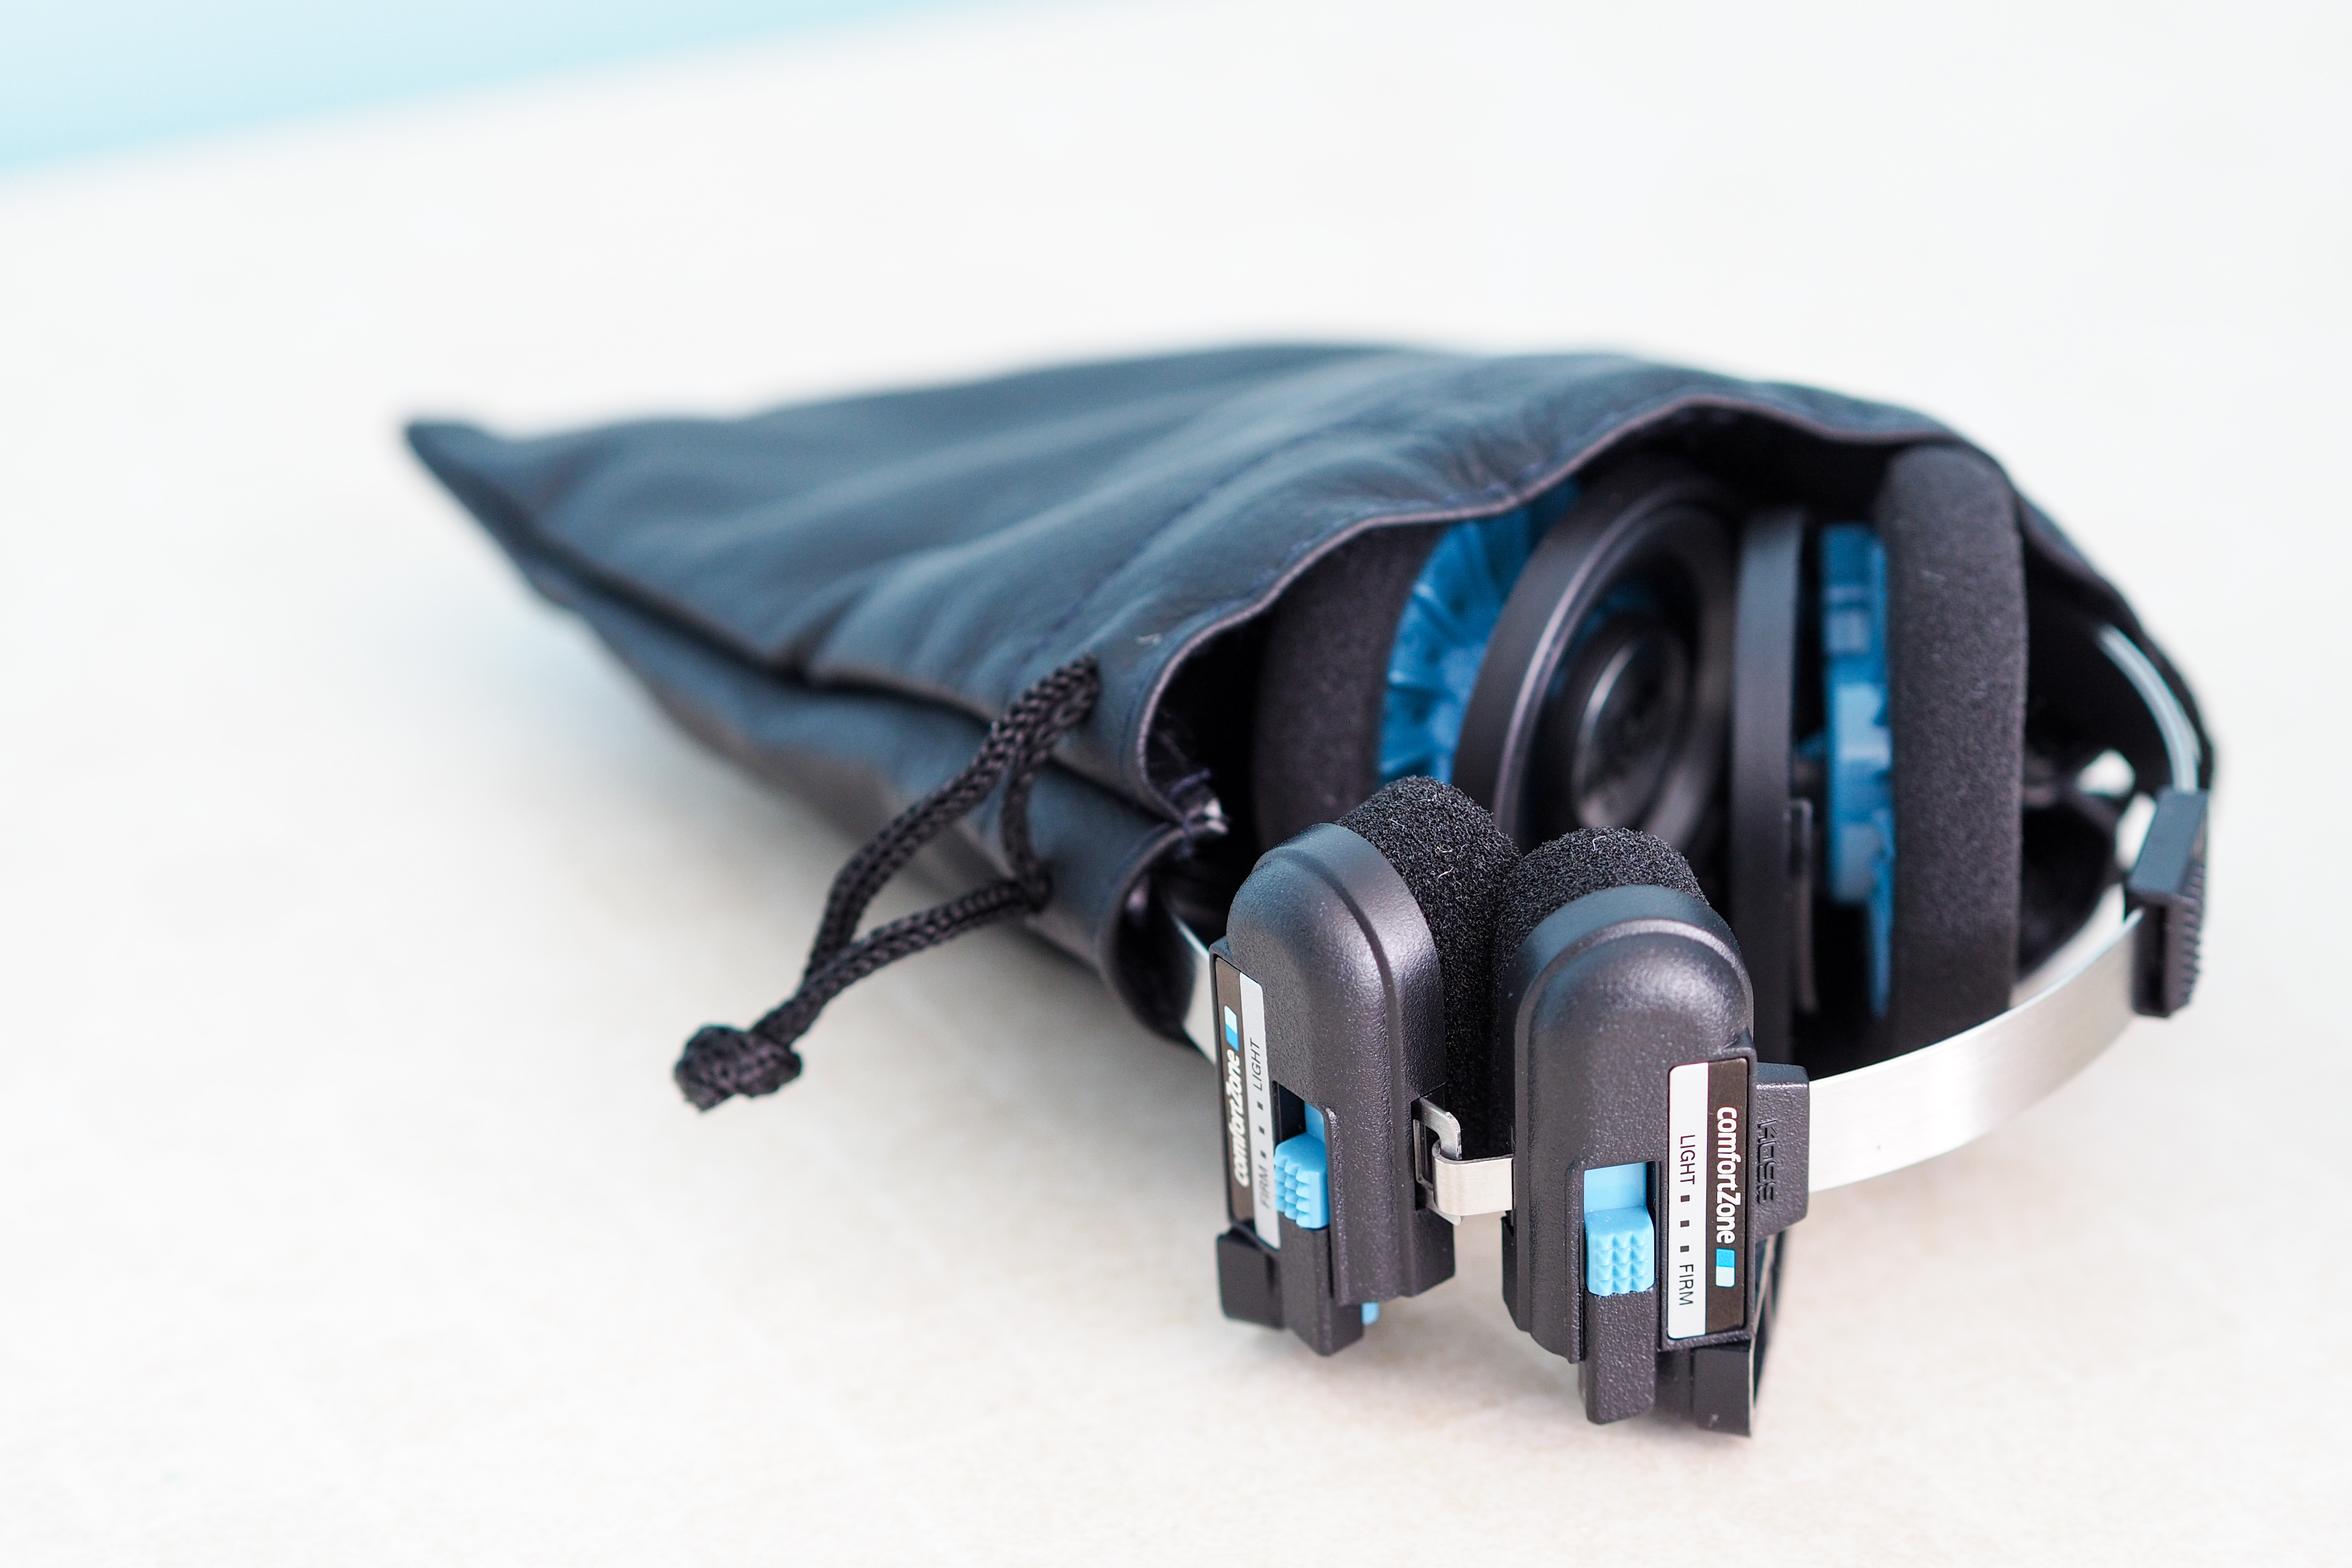 Best on-ear headphones: the headphones peaking out of the included black carrying pouch.